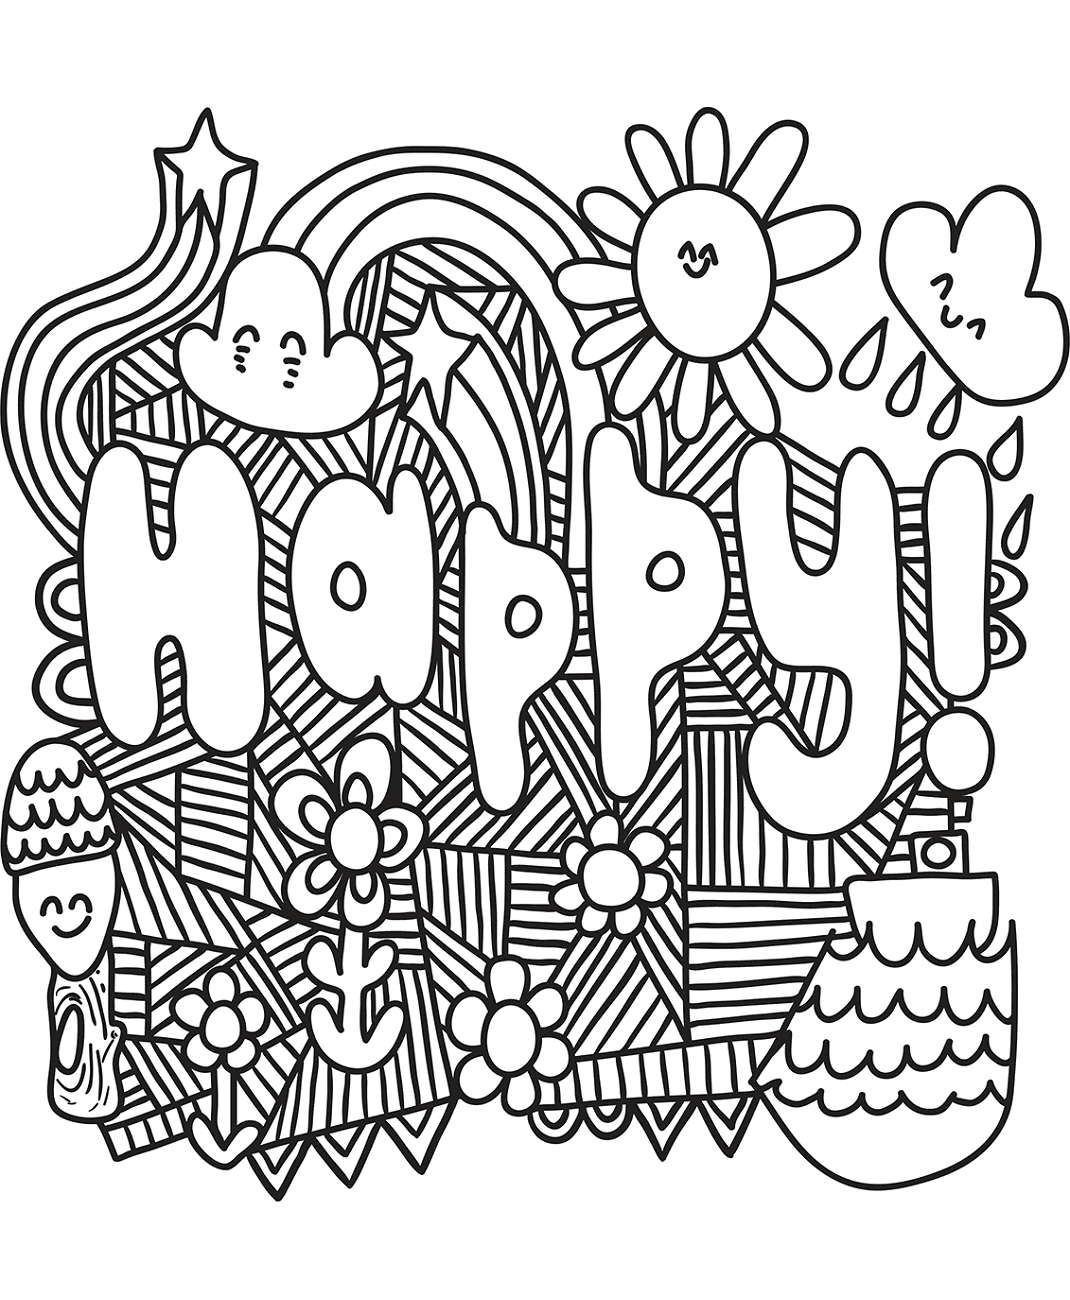 Happy Doodle Art Coloring Page Free Printable Coloring Pages For Kids